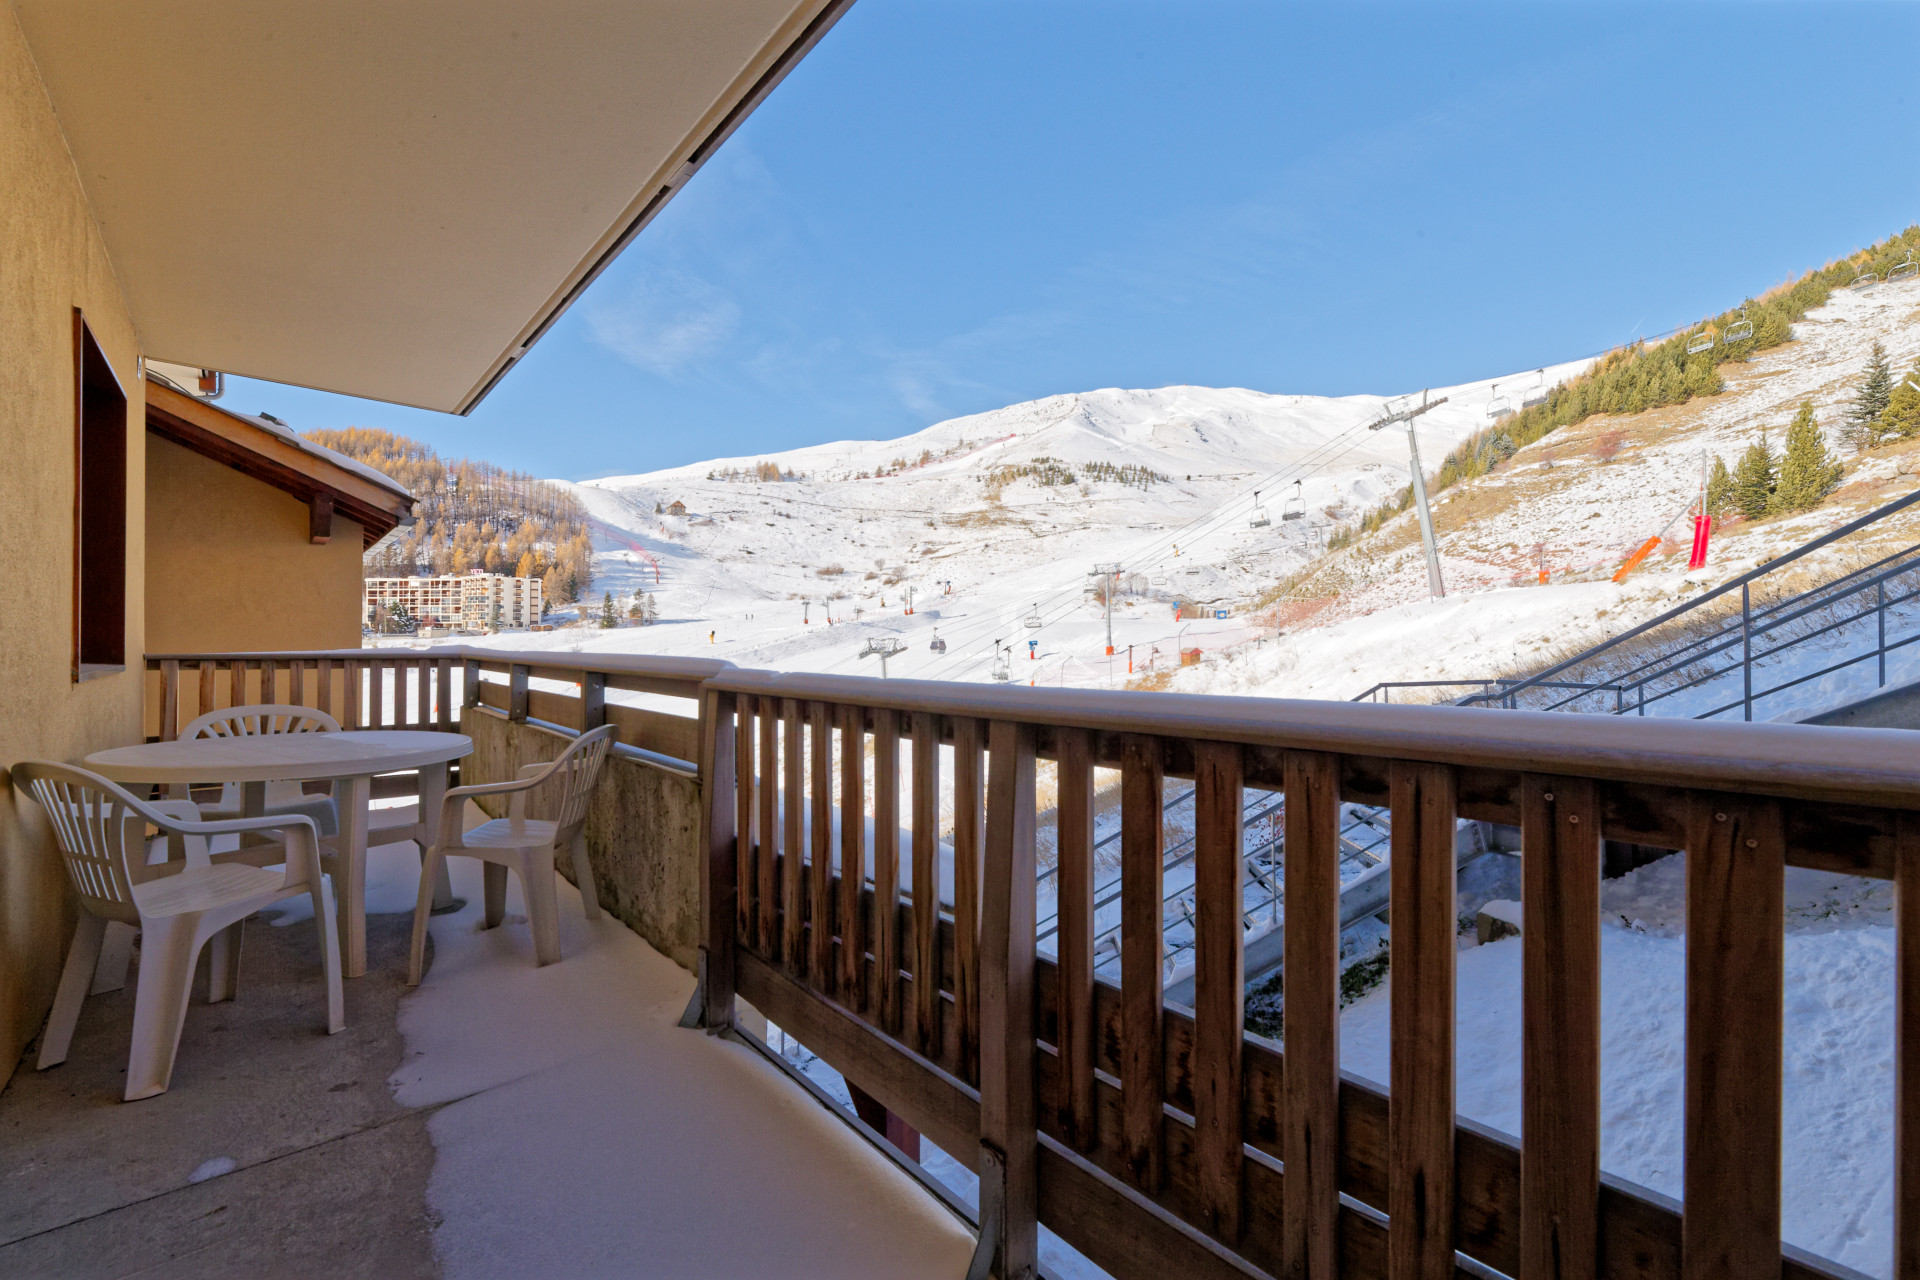 2 rooms 6 persons mountain view and view of the ski slopes - Apartements T.Bergerie B406 -Appart au pied des pistes-6 pers - Orcières Merlette 1850